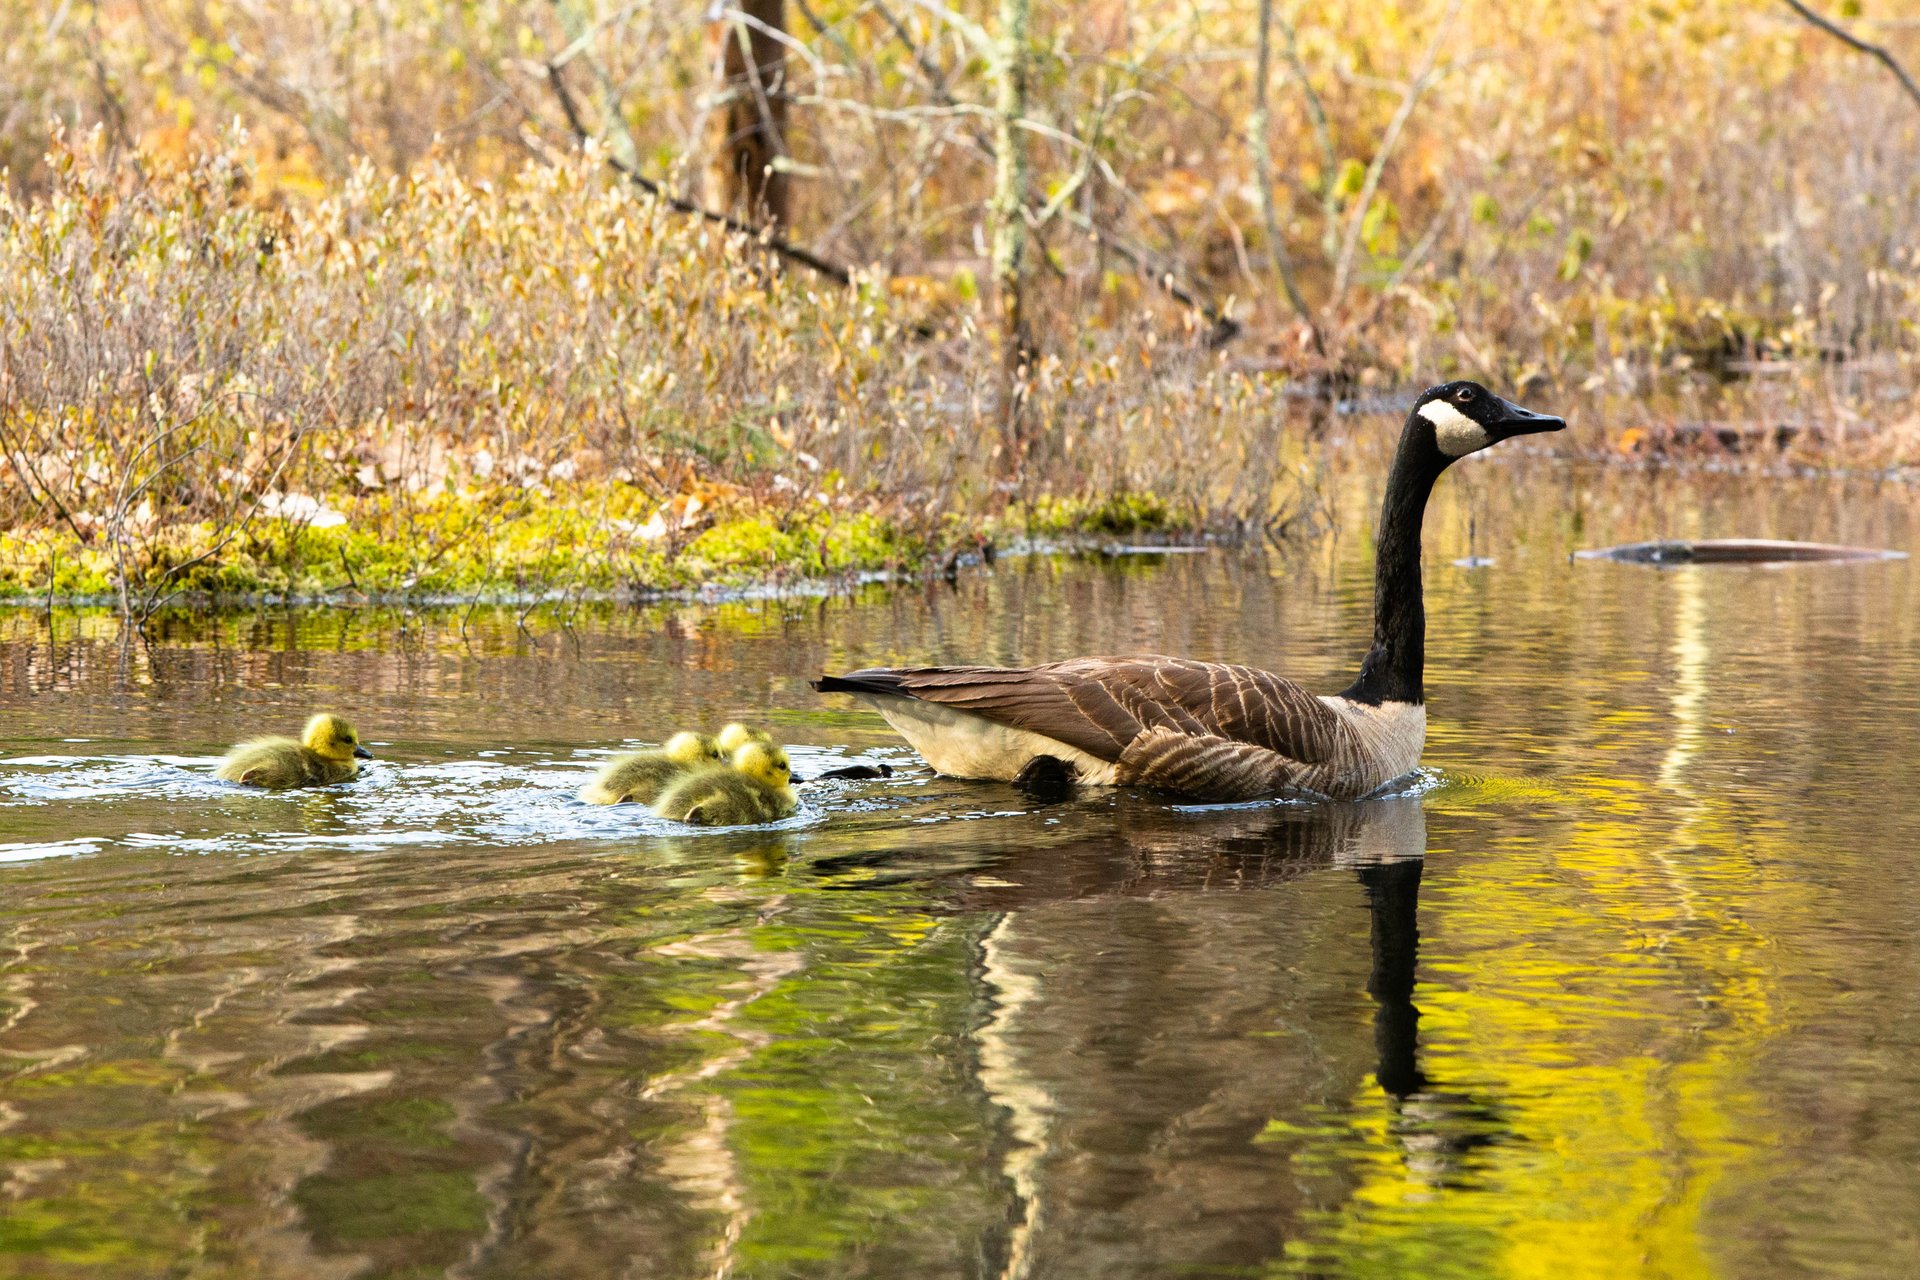 Canada Goose on water with babies following